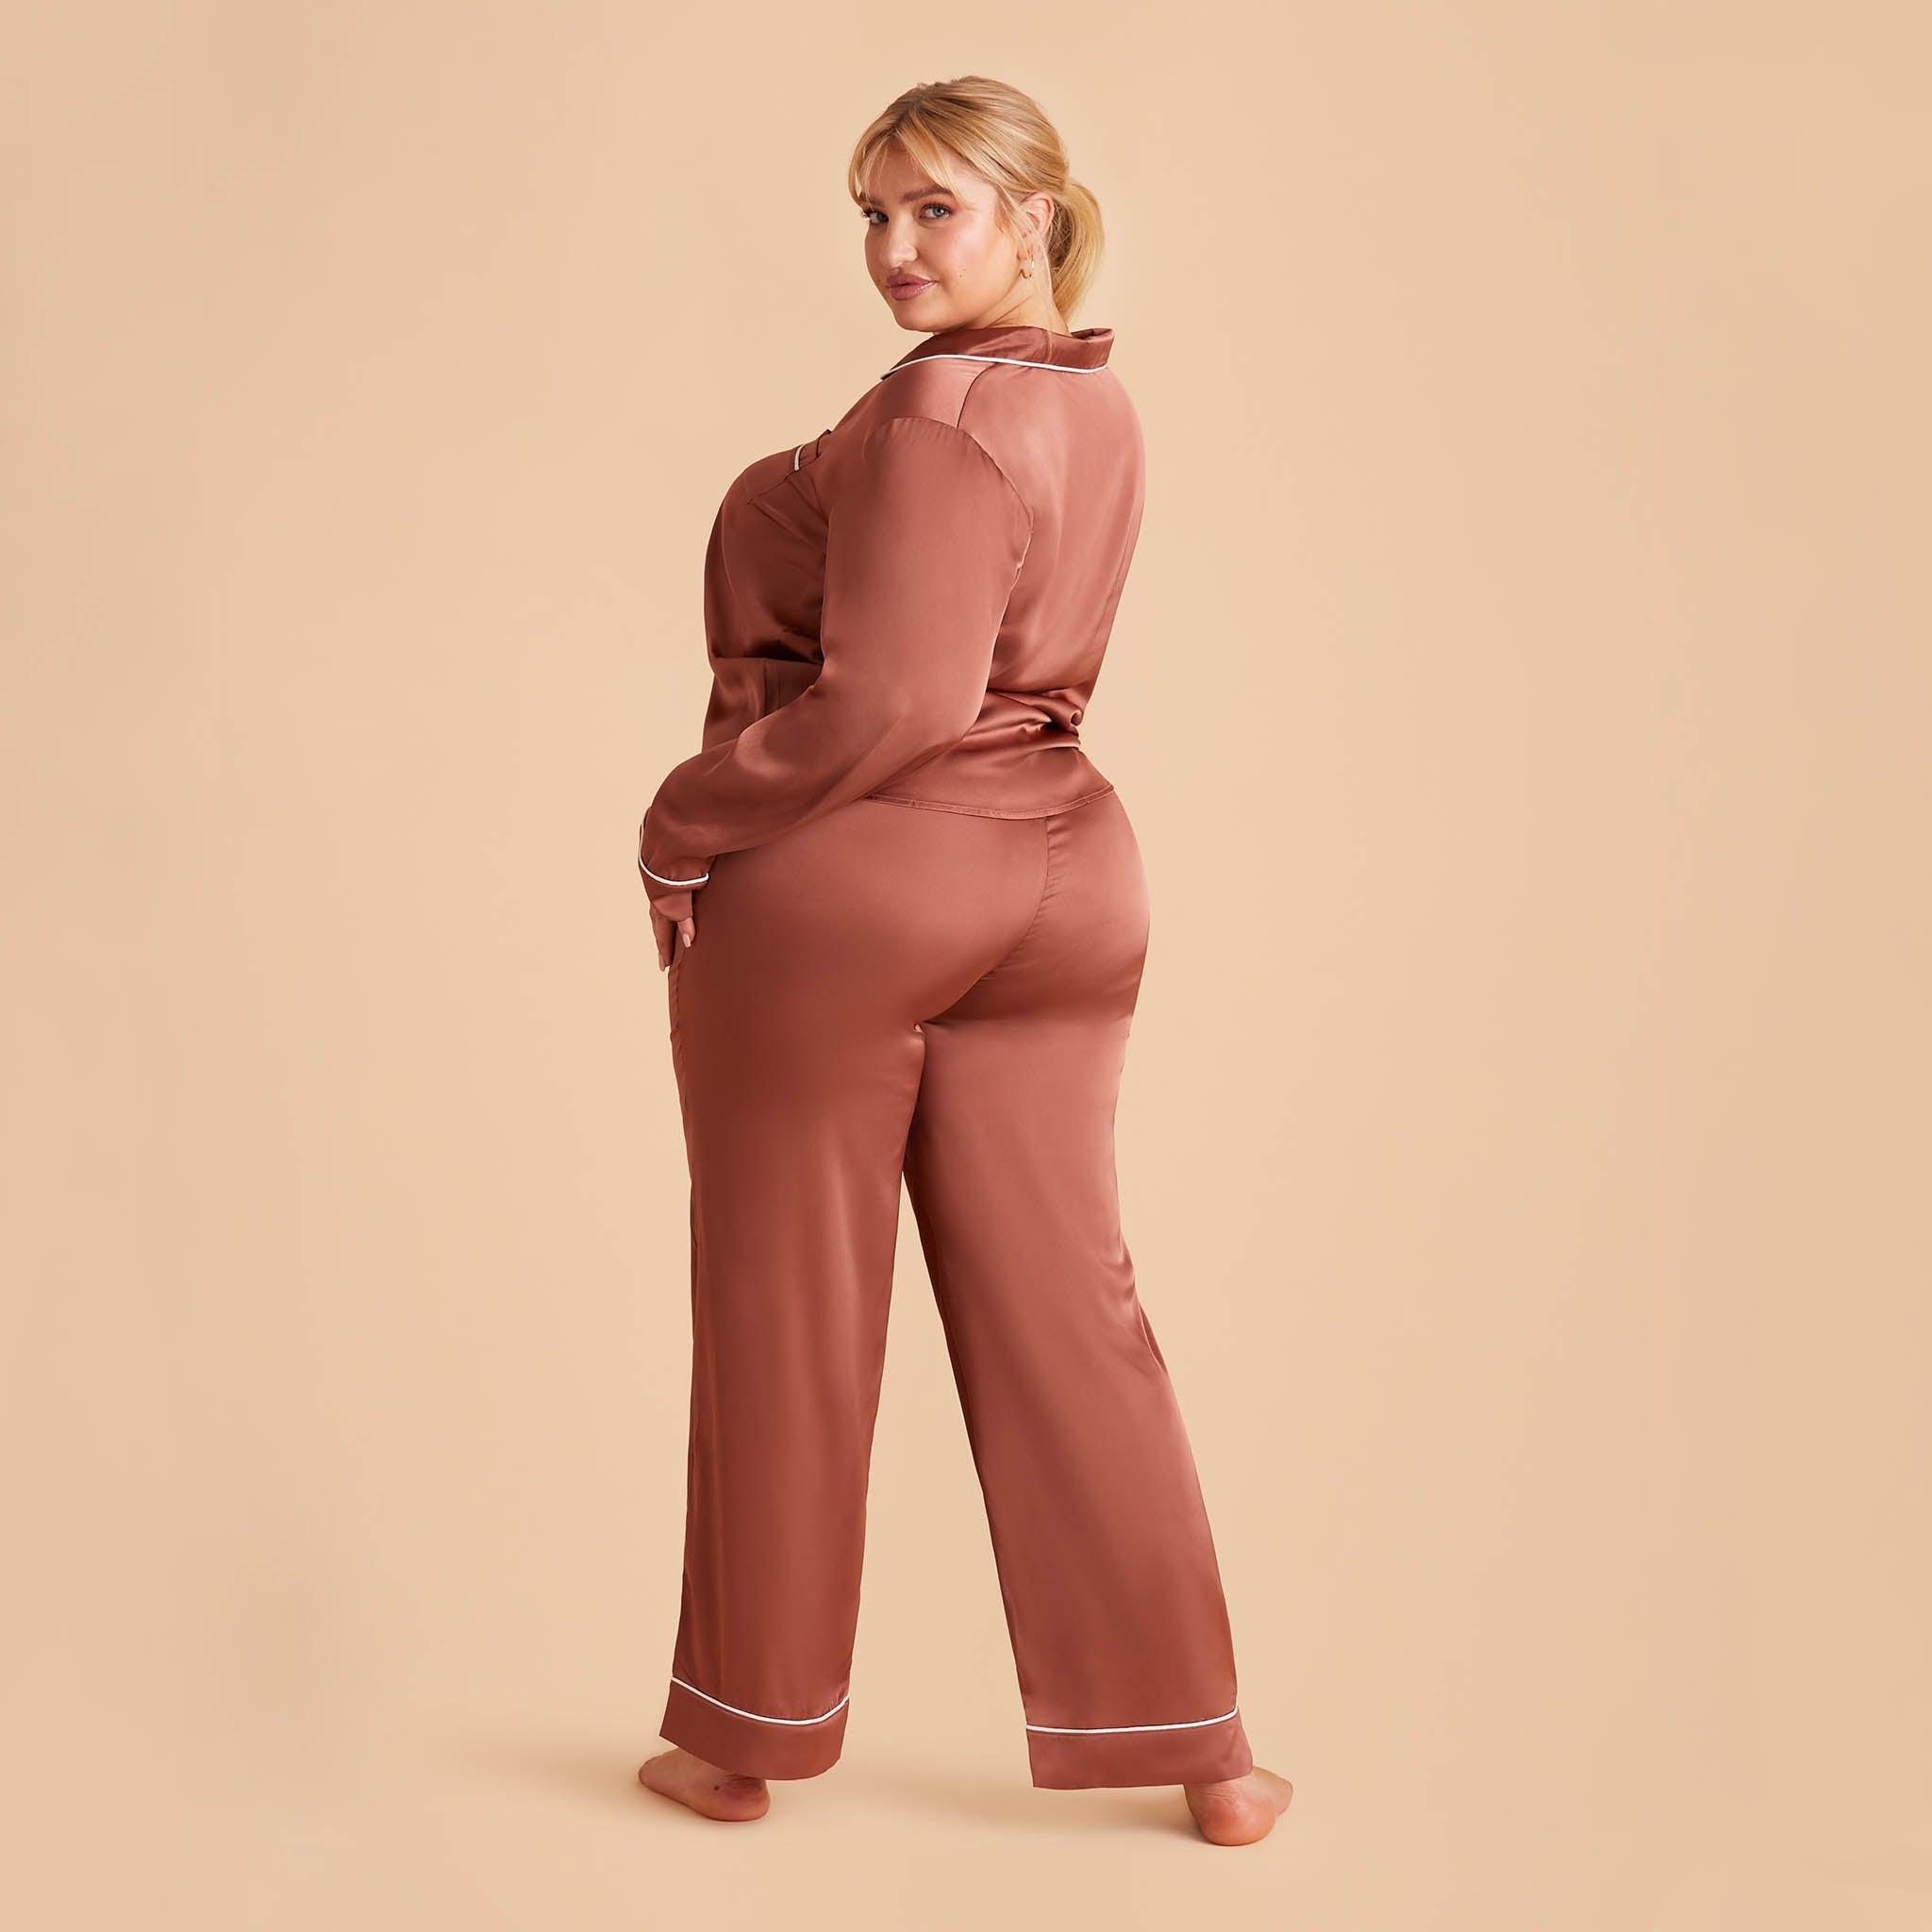 Jonny Plus Size Satin Long Sleeve Pajama Top With White Piping in desert rose, back view